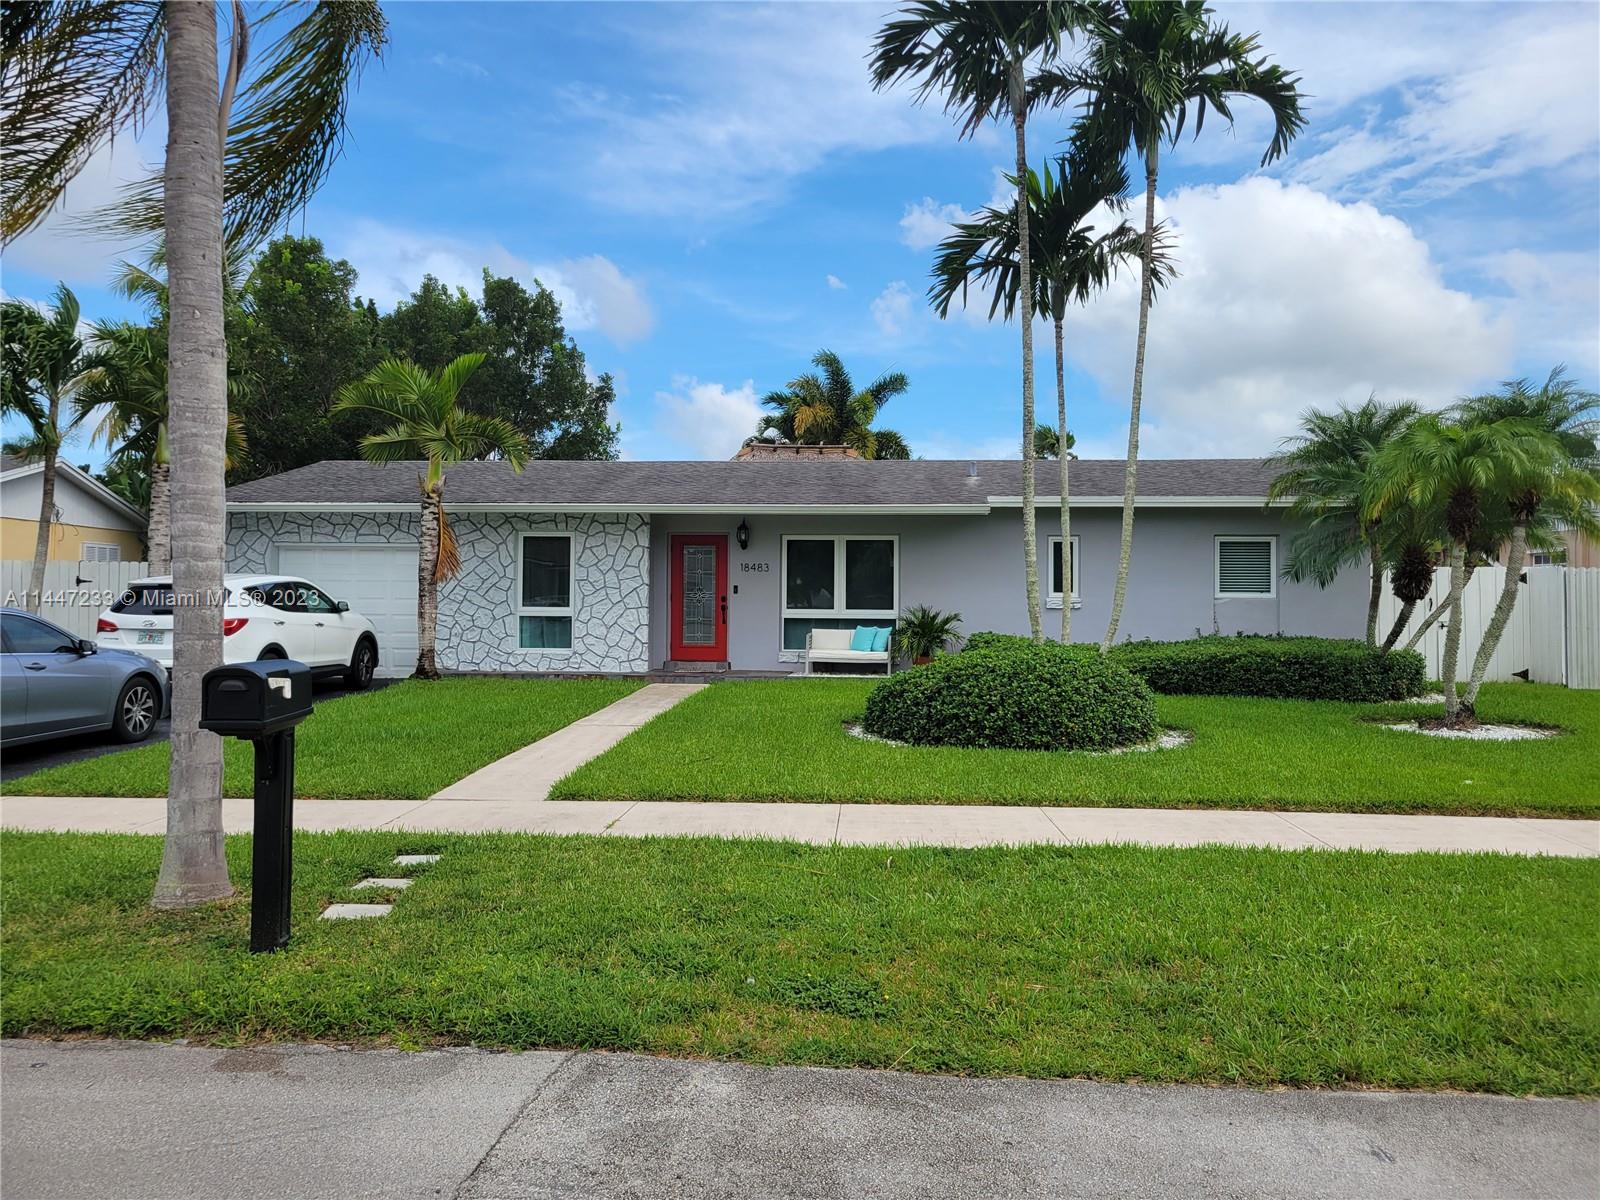 Live your best life in this tropical oasis! With 3 bedrooms and 2 bathrooms, this North Cutler Bay home has so many entertaining features inside and out. Relax under the large tiki hut to watch the kids in the pool and BBQ or even watch tv. Inside you'll find a fully converted garage space which is perfect for movie nights, or just a quiet space to escape the rest of the house. The spacious master bedroom has a large walk-in closet and dressing area (or workspace), large bathroom with double-sinks and a view to the back patio. You'll be just one mile from Publix, shops and restaurants in one direction, and one mile from scenic old cutler road in the other direction.